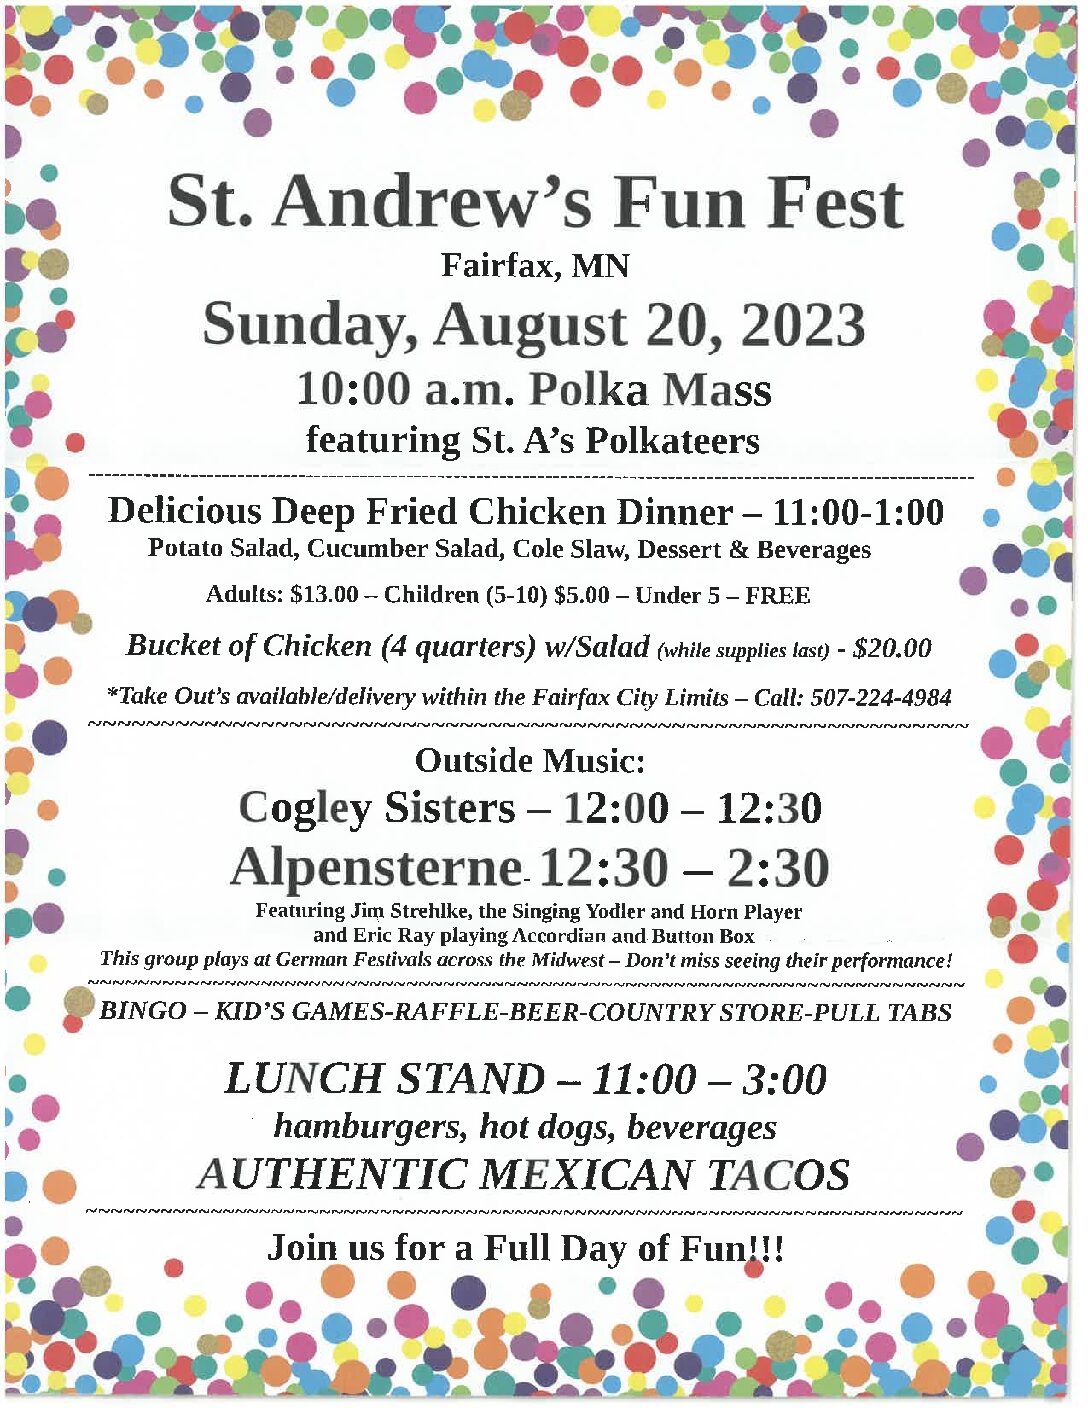 <h1 class="tribe-events-single-event-title">St. Andrew’s Fun Fest</h1>